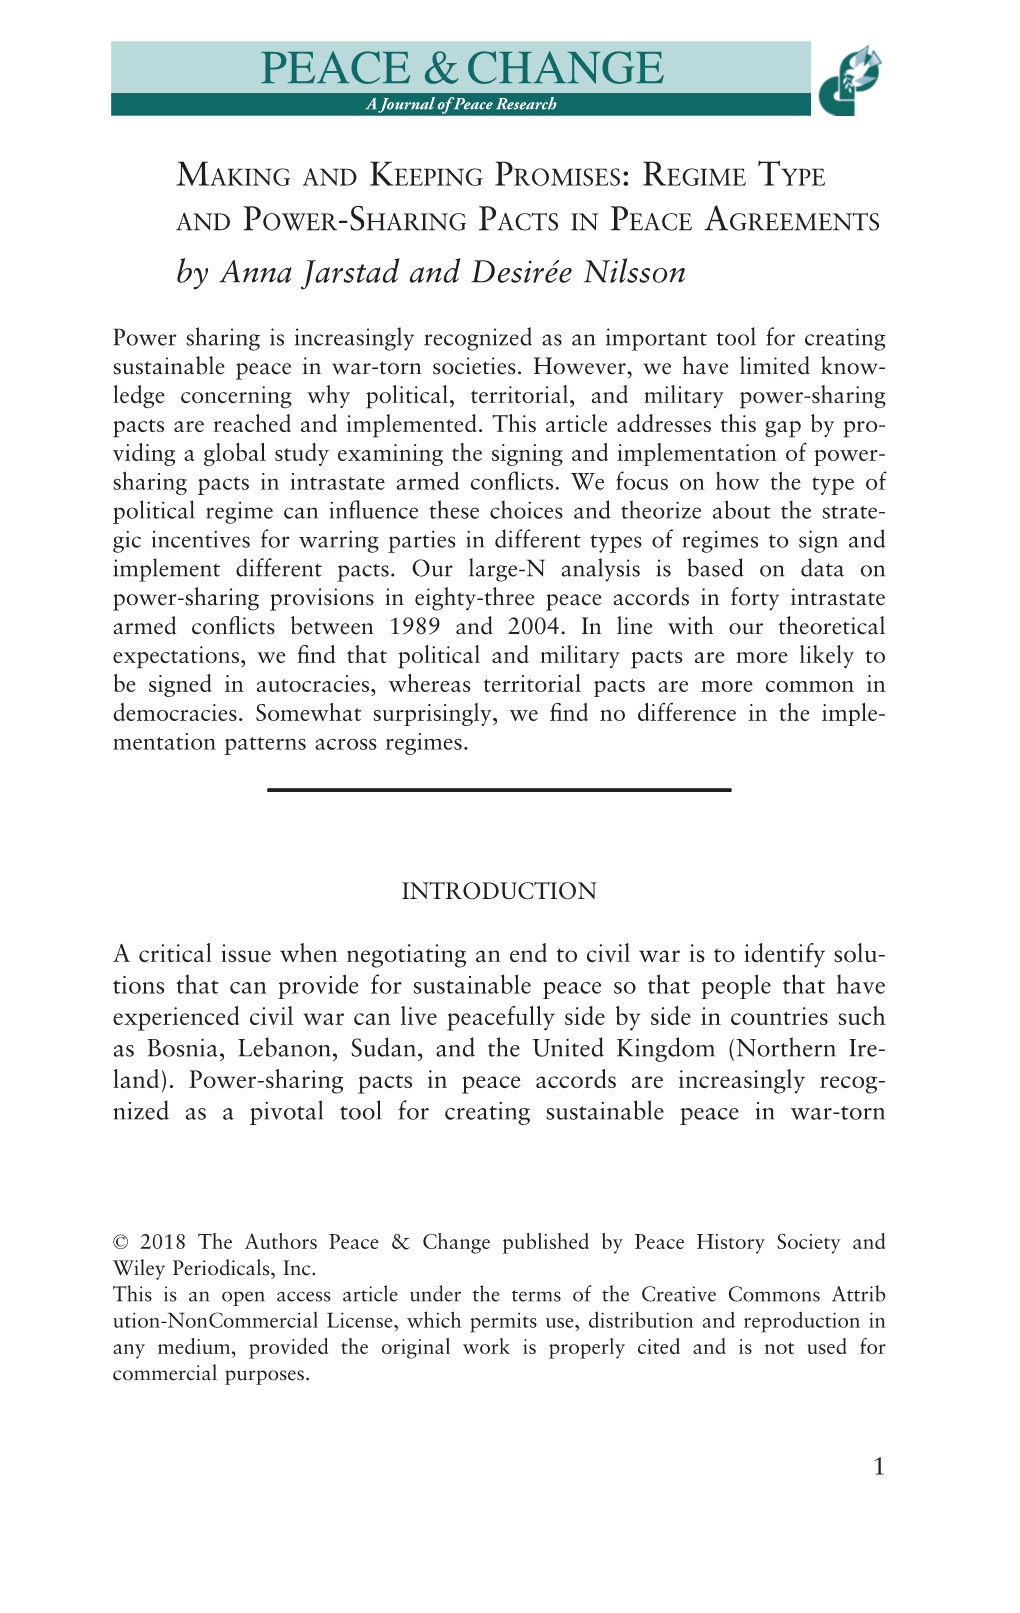 Regime Type and Power‐Sharing Pacts in Peace Agreements